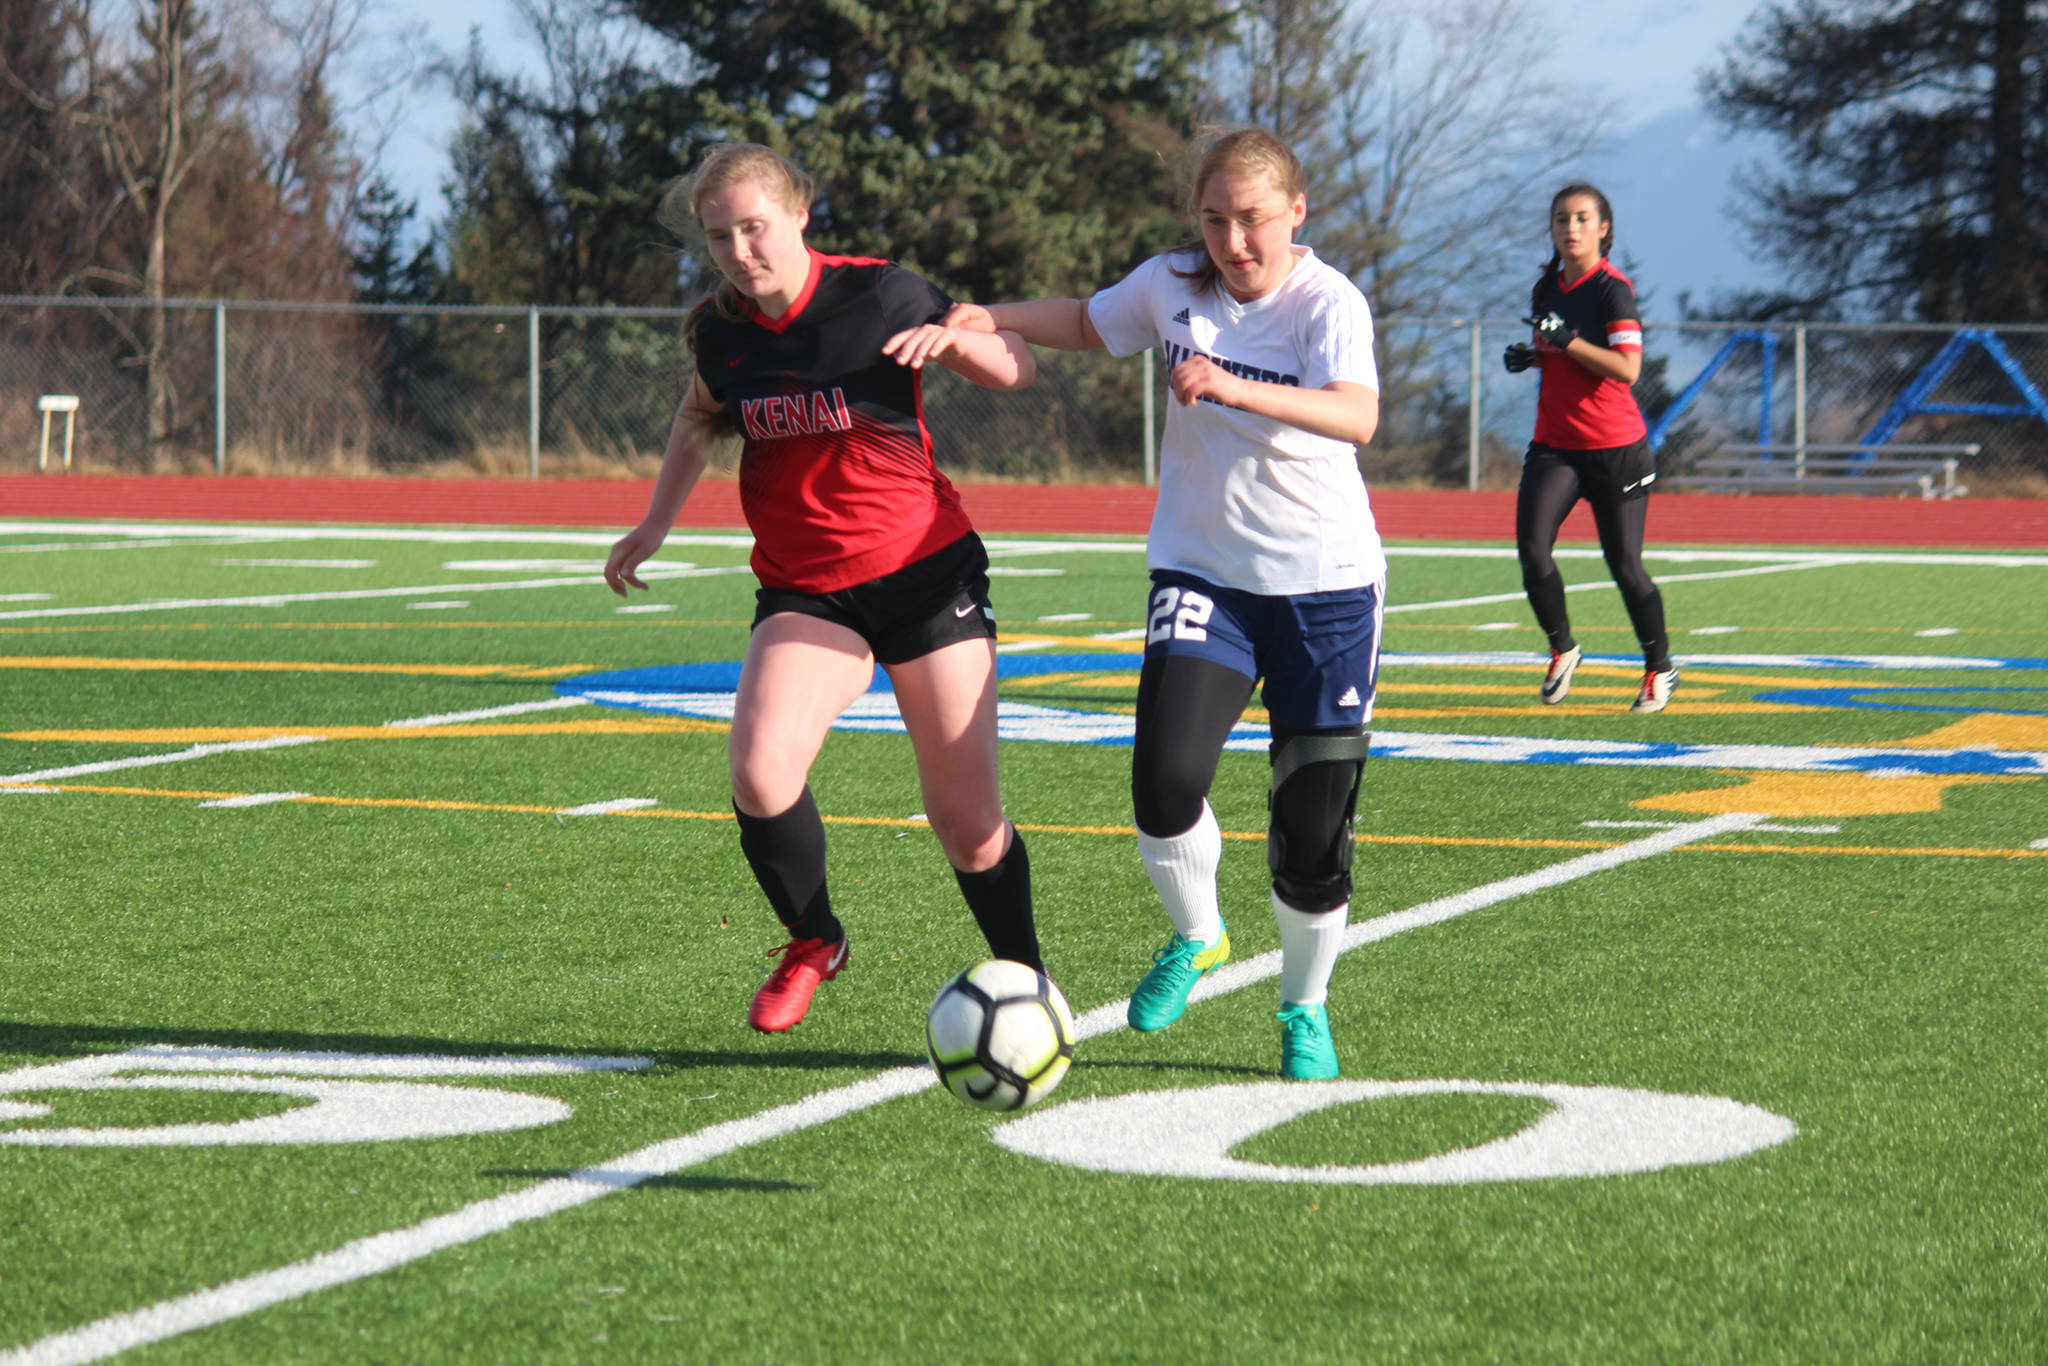 Homer’s Brenna McCarron battles with Kenai’s Julia Hanson to reach the ball first during their game Tuesday, April 24, 2018 in Homer, Alaska. The Mariners beat the Kardinals 1-0. (Photo by Megan Pacer/Homer News)